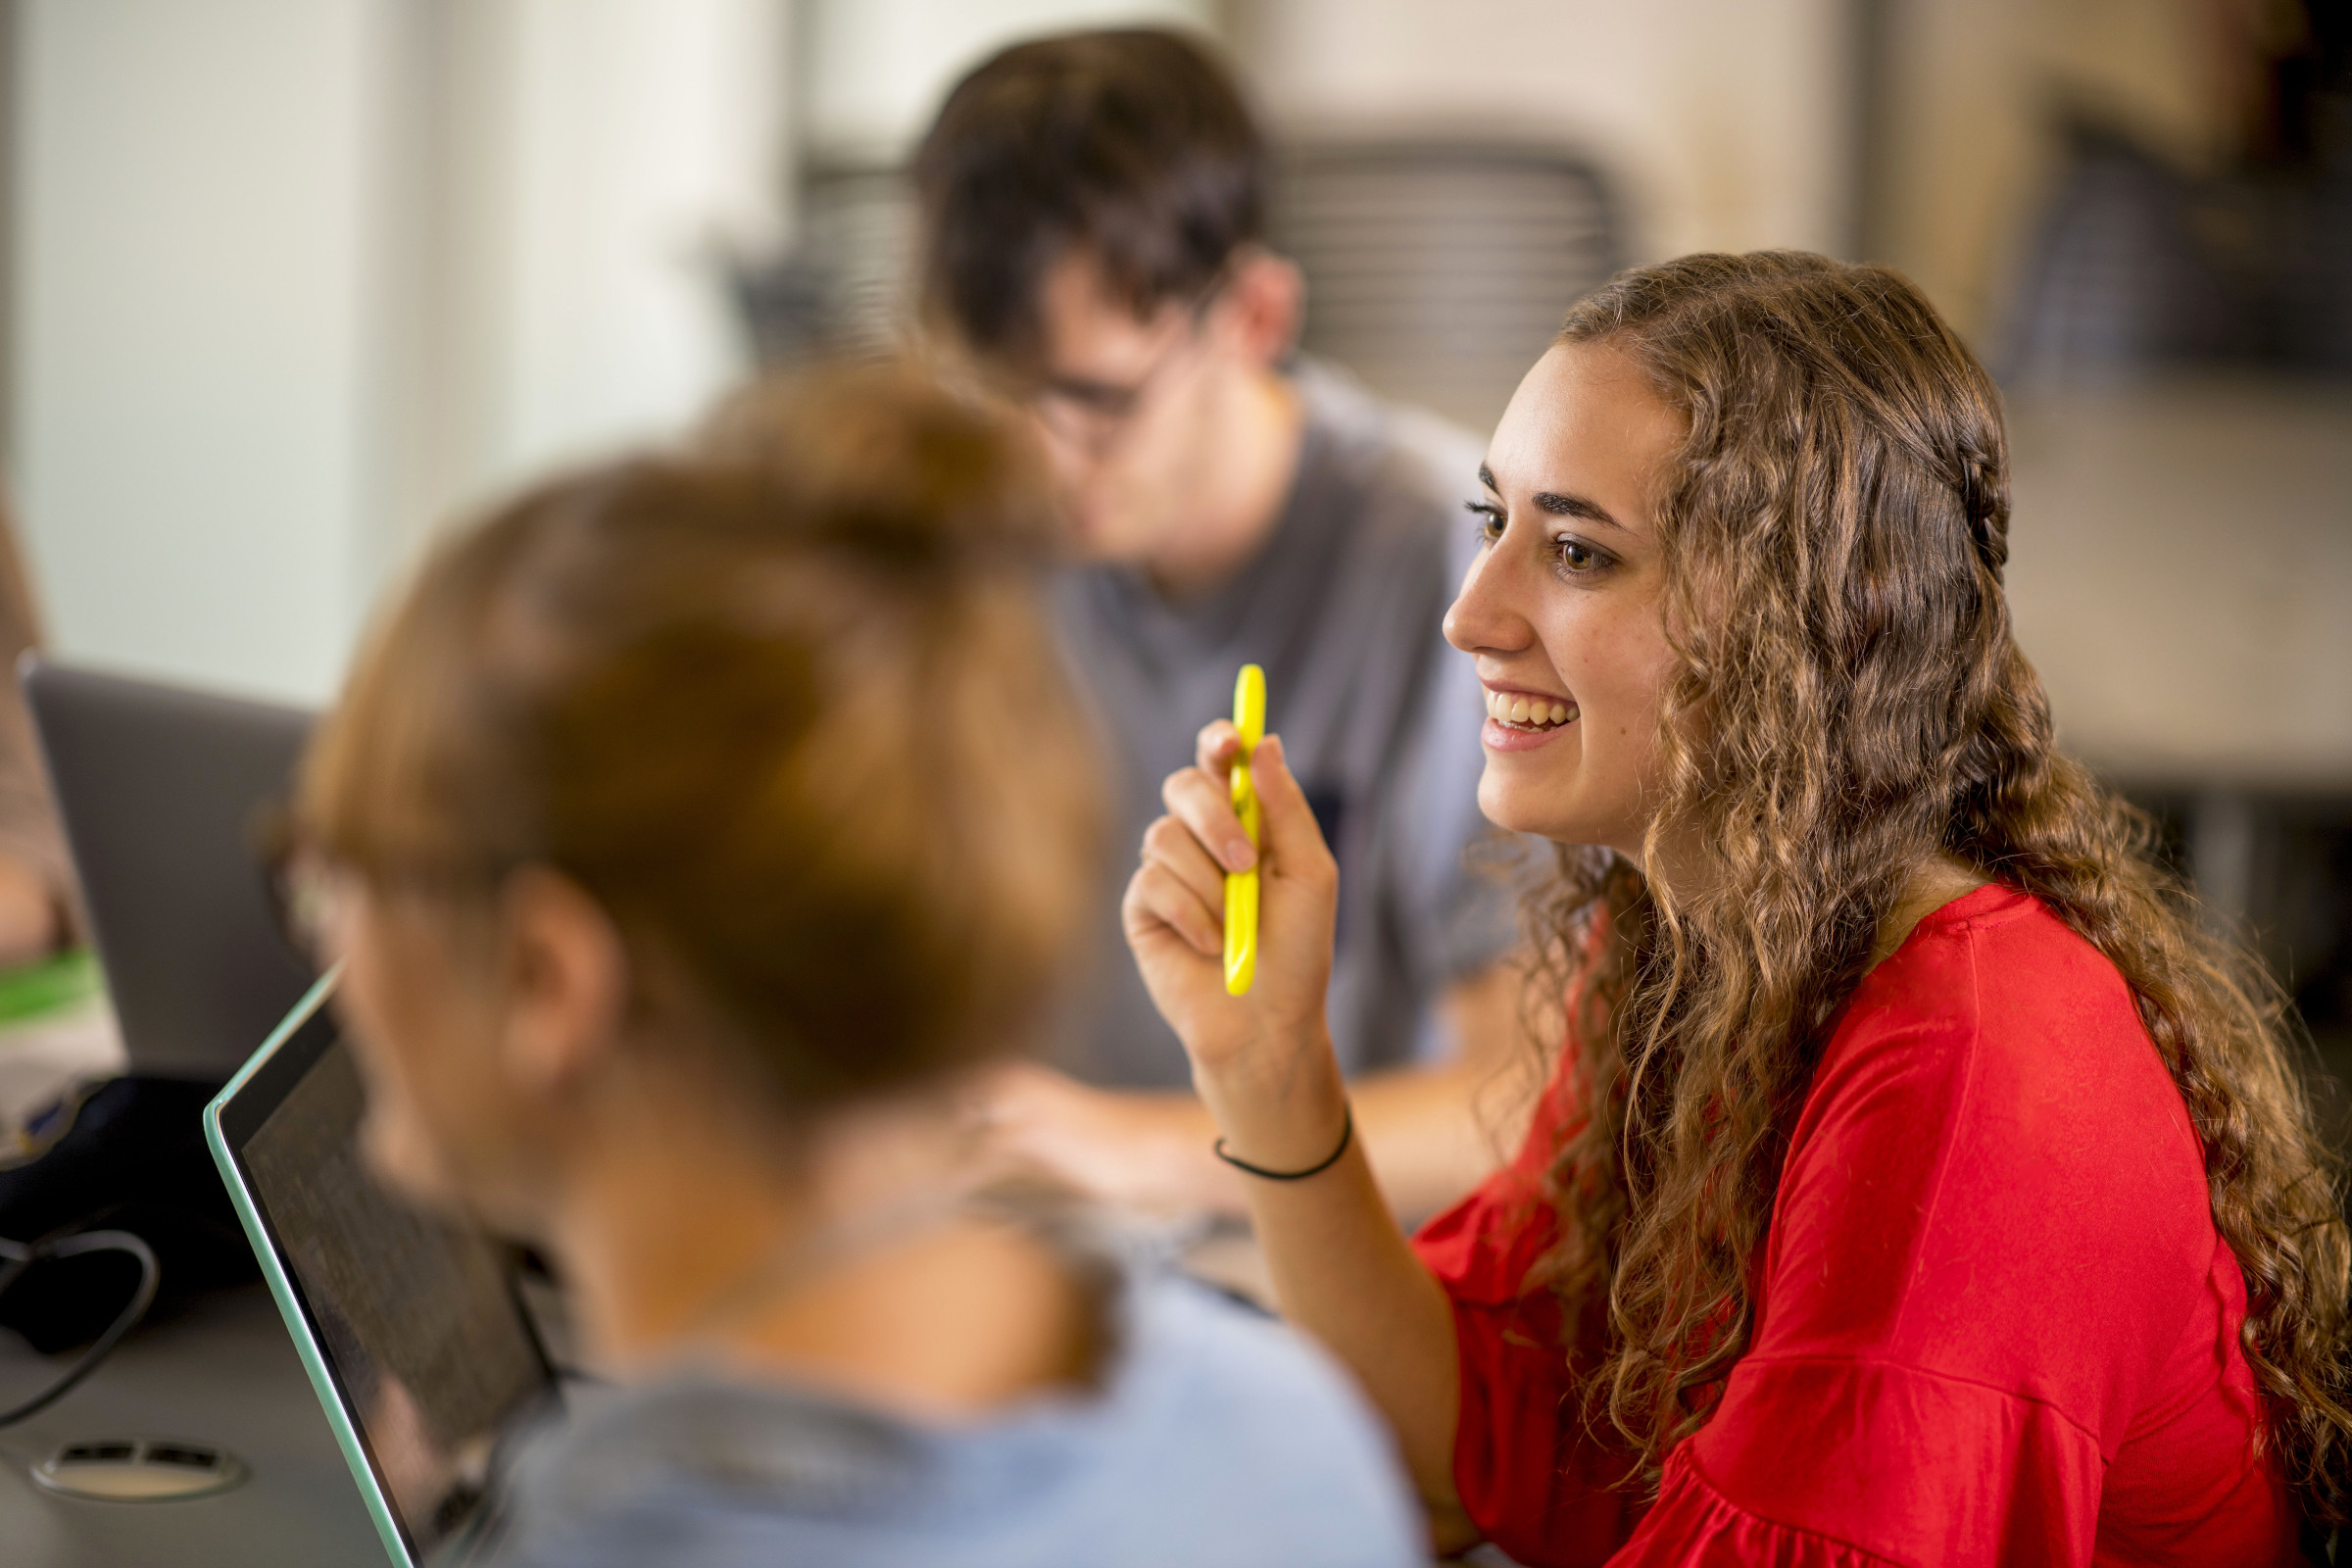 A female student holding a highlighter and smiling, there are tow other students who are not in focus